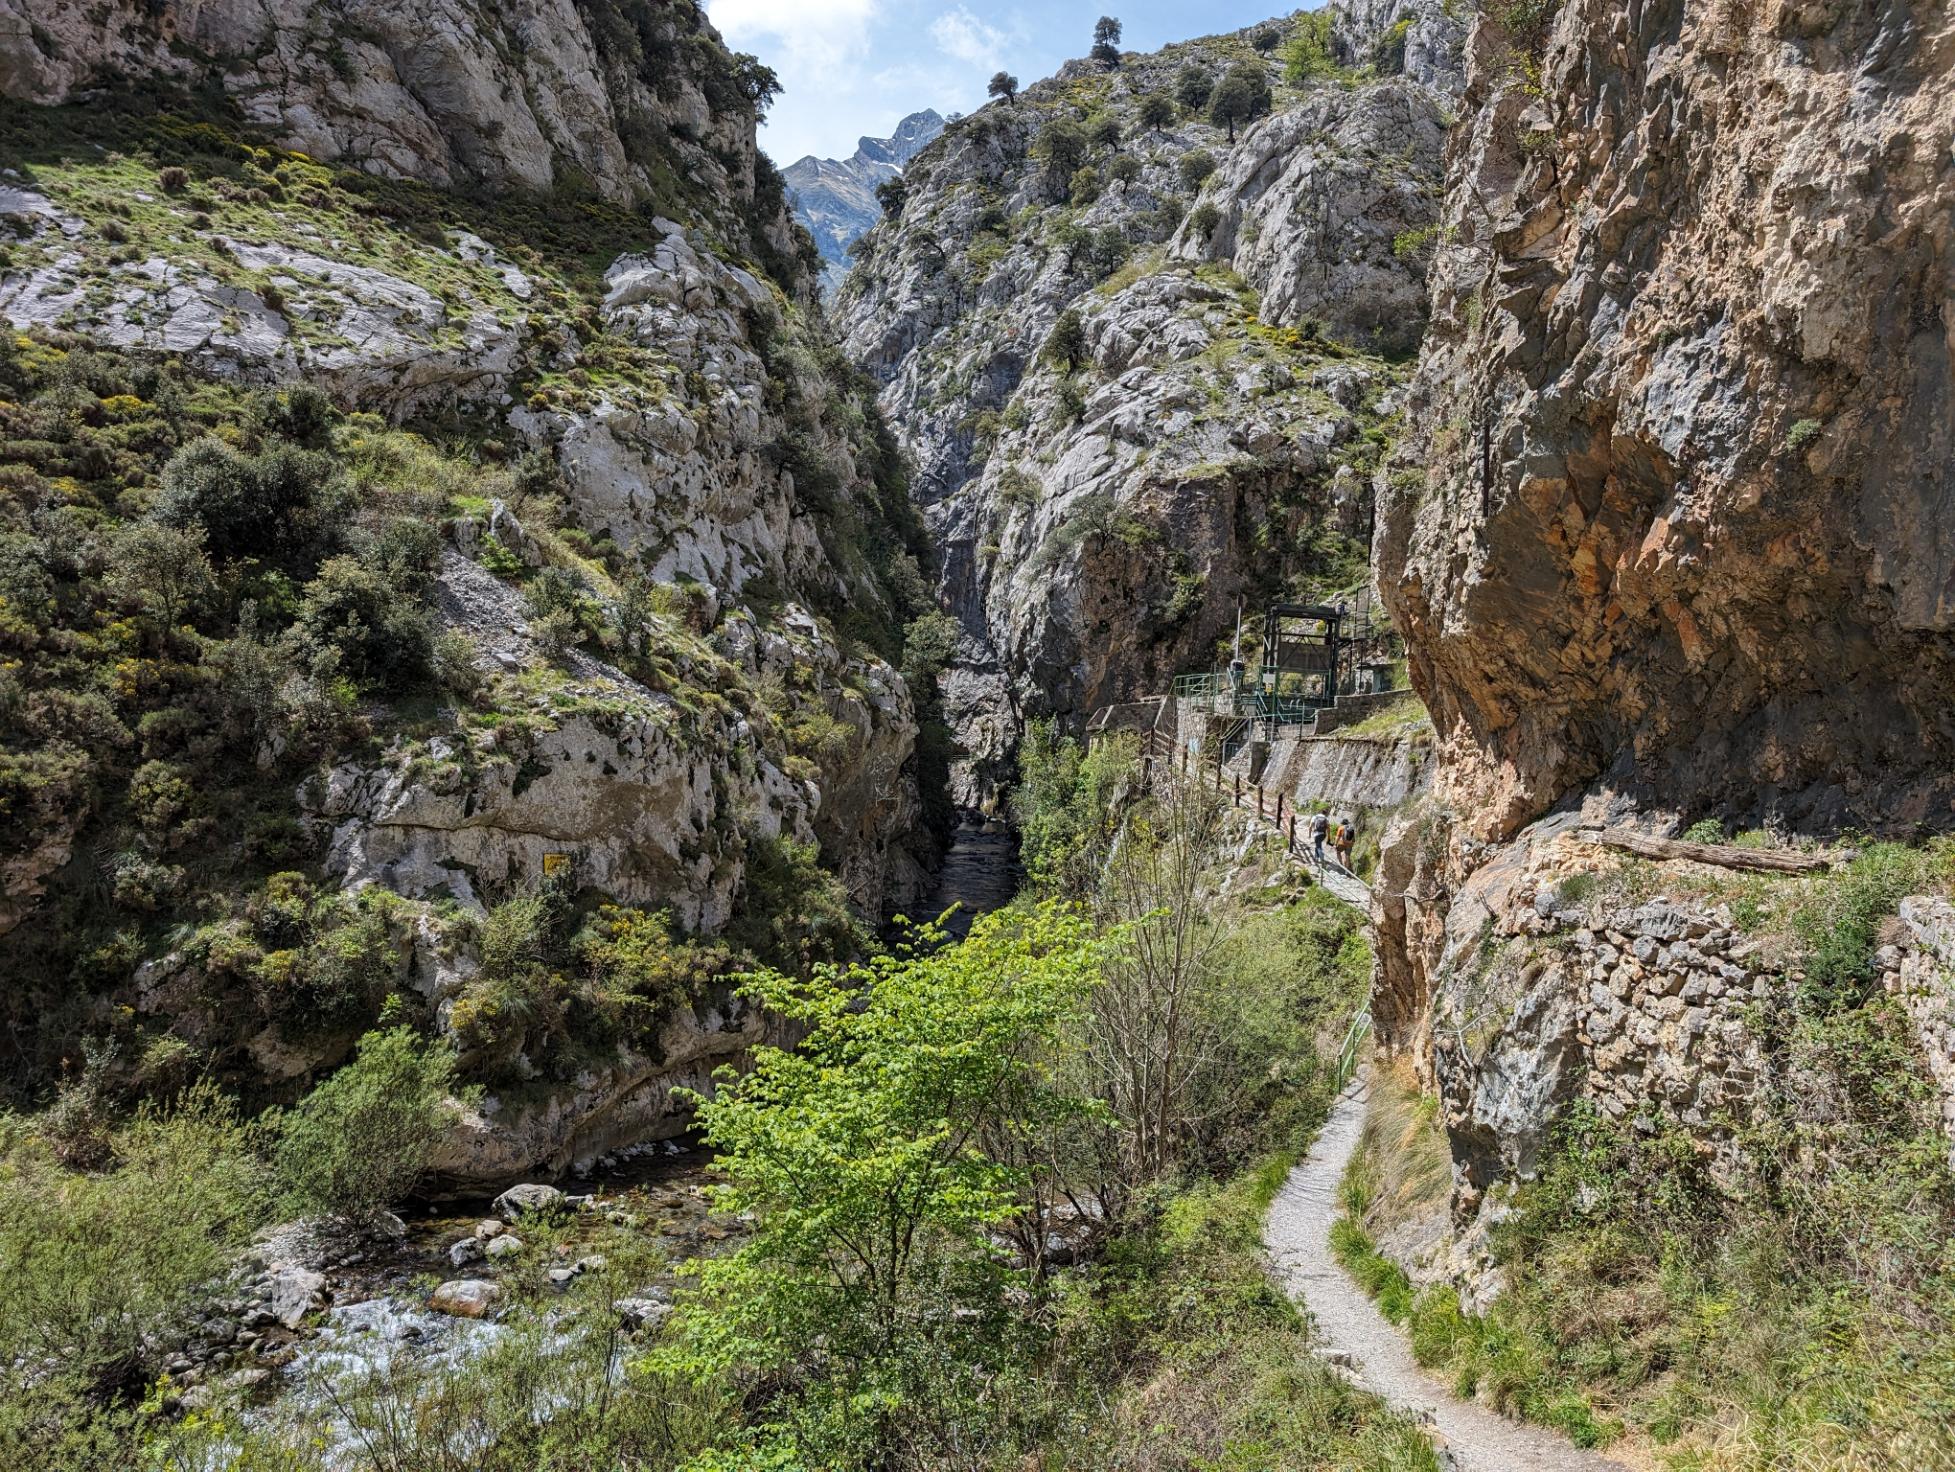 The final stretch of the Ruta del Cares, which passes through a particularly narrow gorge. Photo: Stuart Kenny